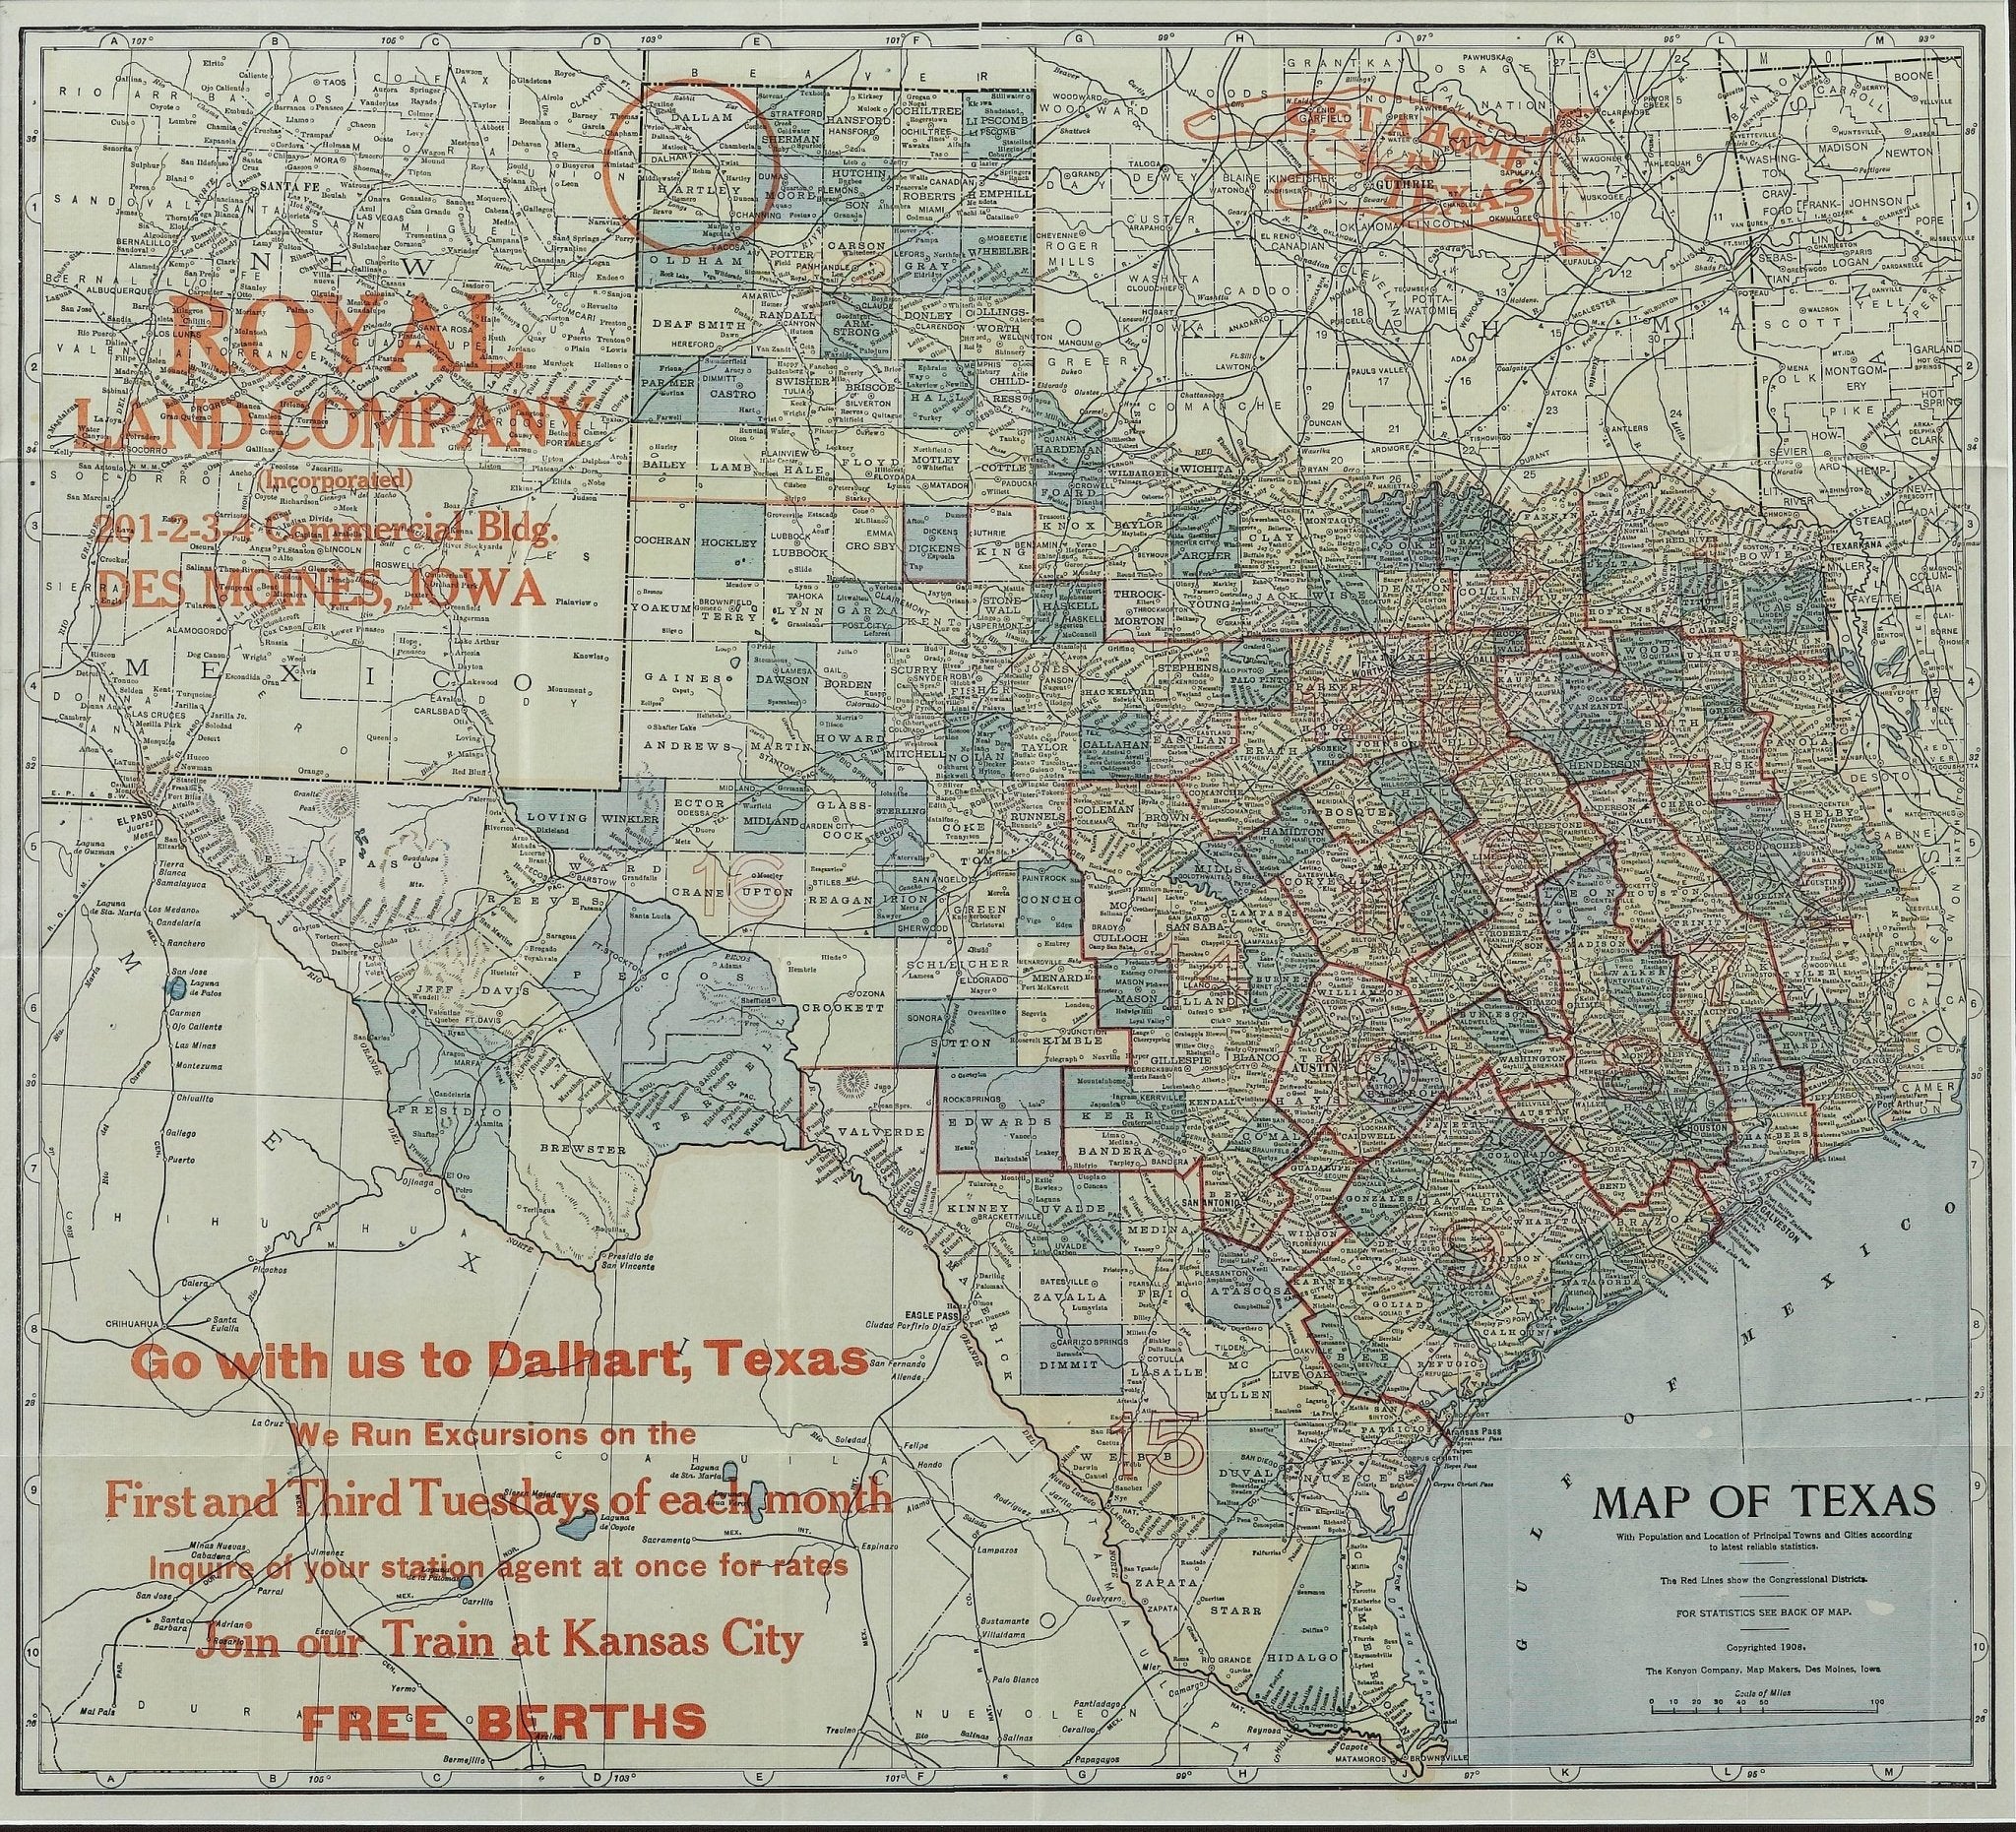 1908 "Map of Texas" by The Kenyon Company - The Great Republic